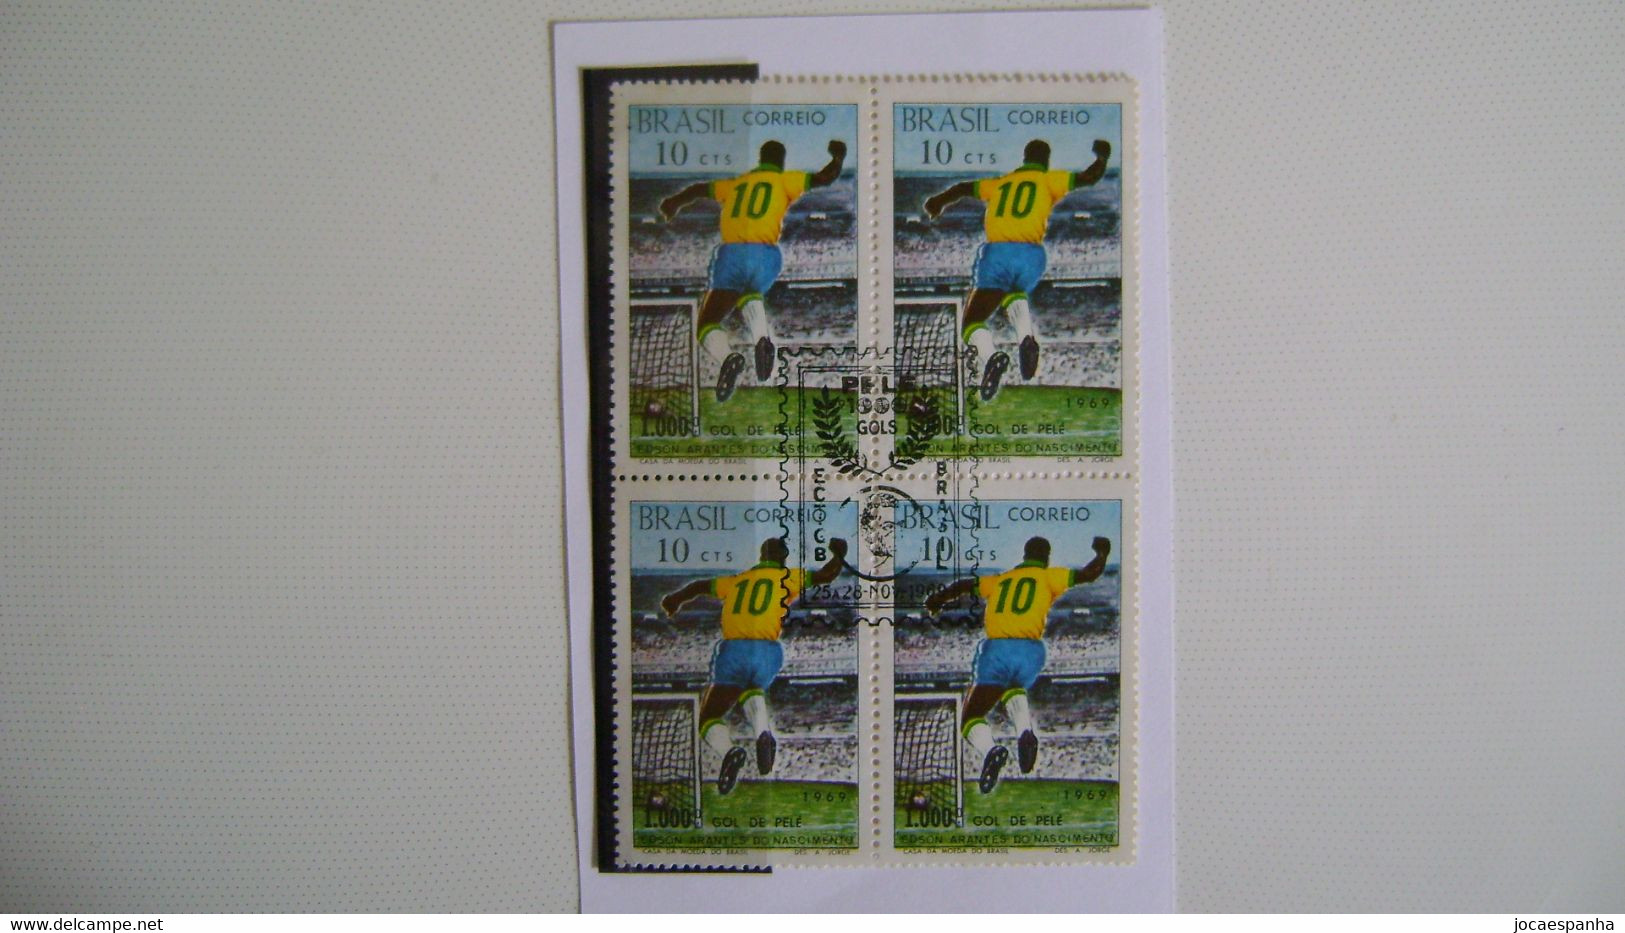 BRAZIL / BRASIL - STAMP ON COURT OF THE 1000th GOL OF THE PELE KING WITH COMMEMORATIVE STAMP IN 1969 - Gebruikt